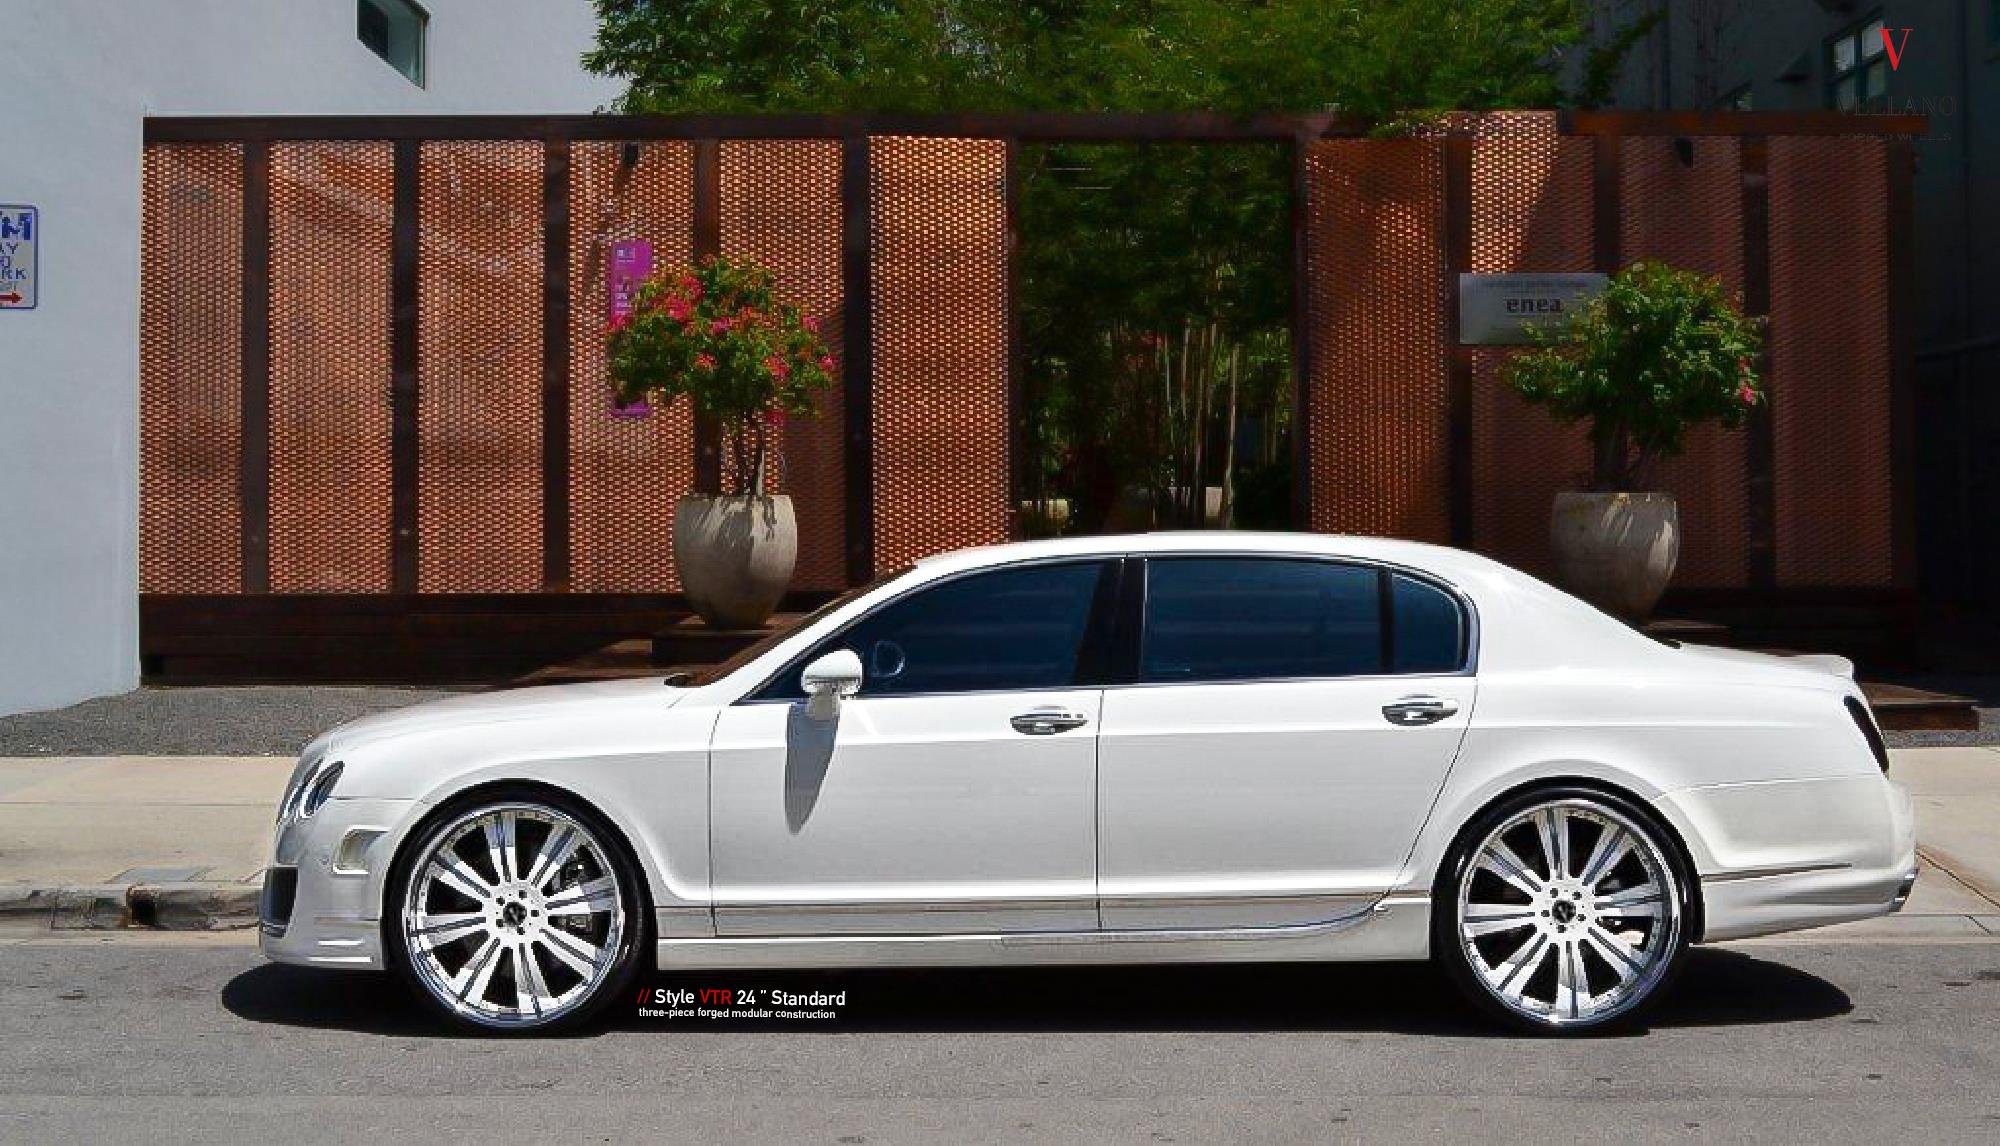 Custom Side Skirts on White Bently Flying Spur - Photo by Vellano